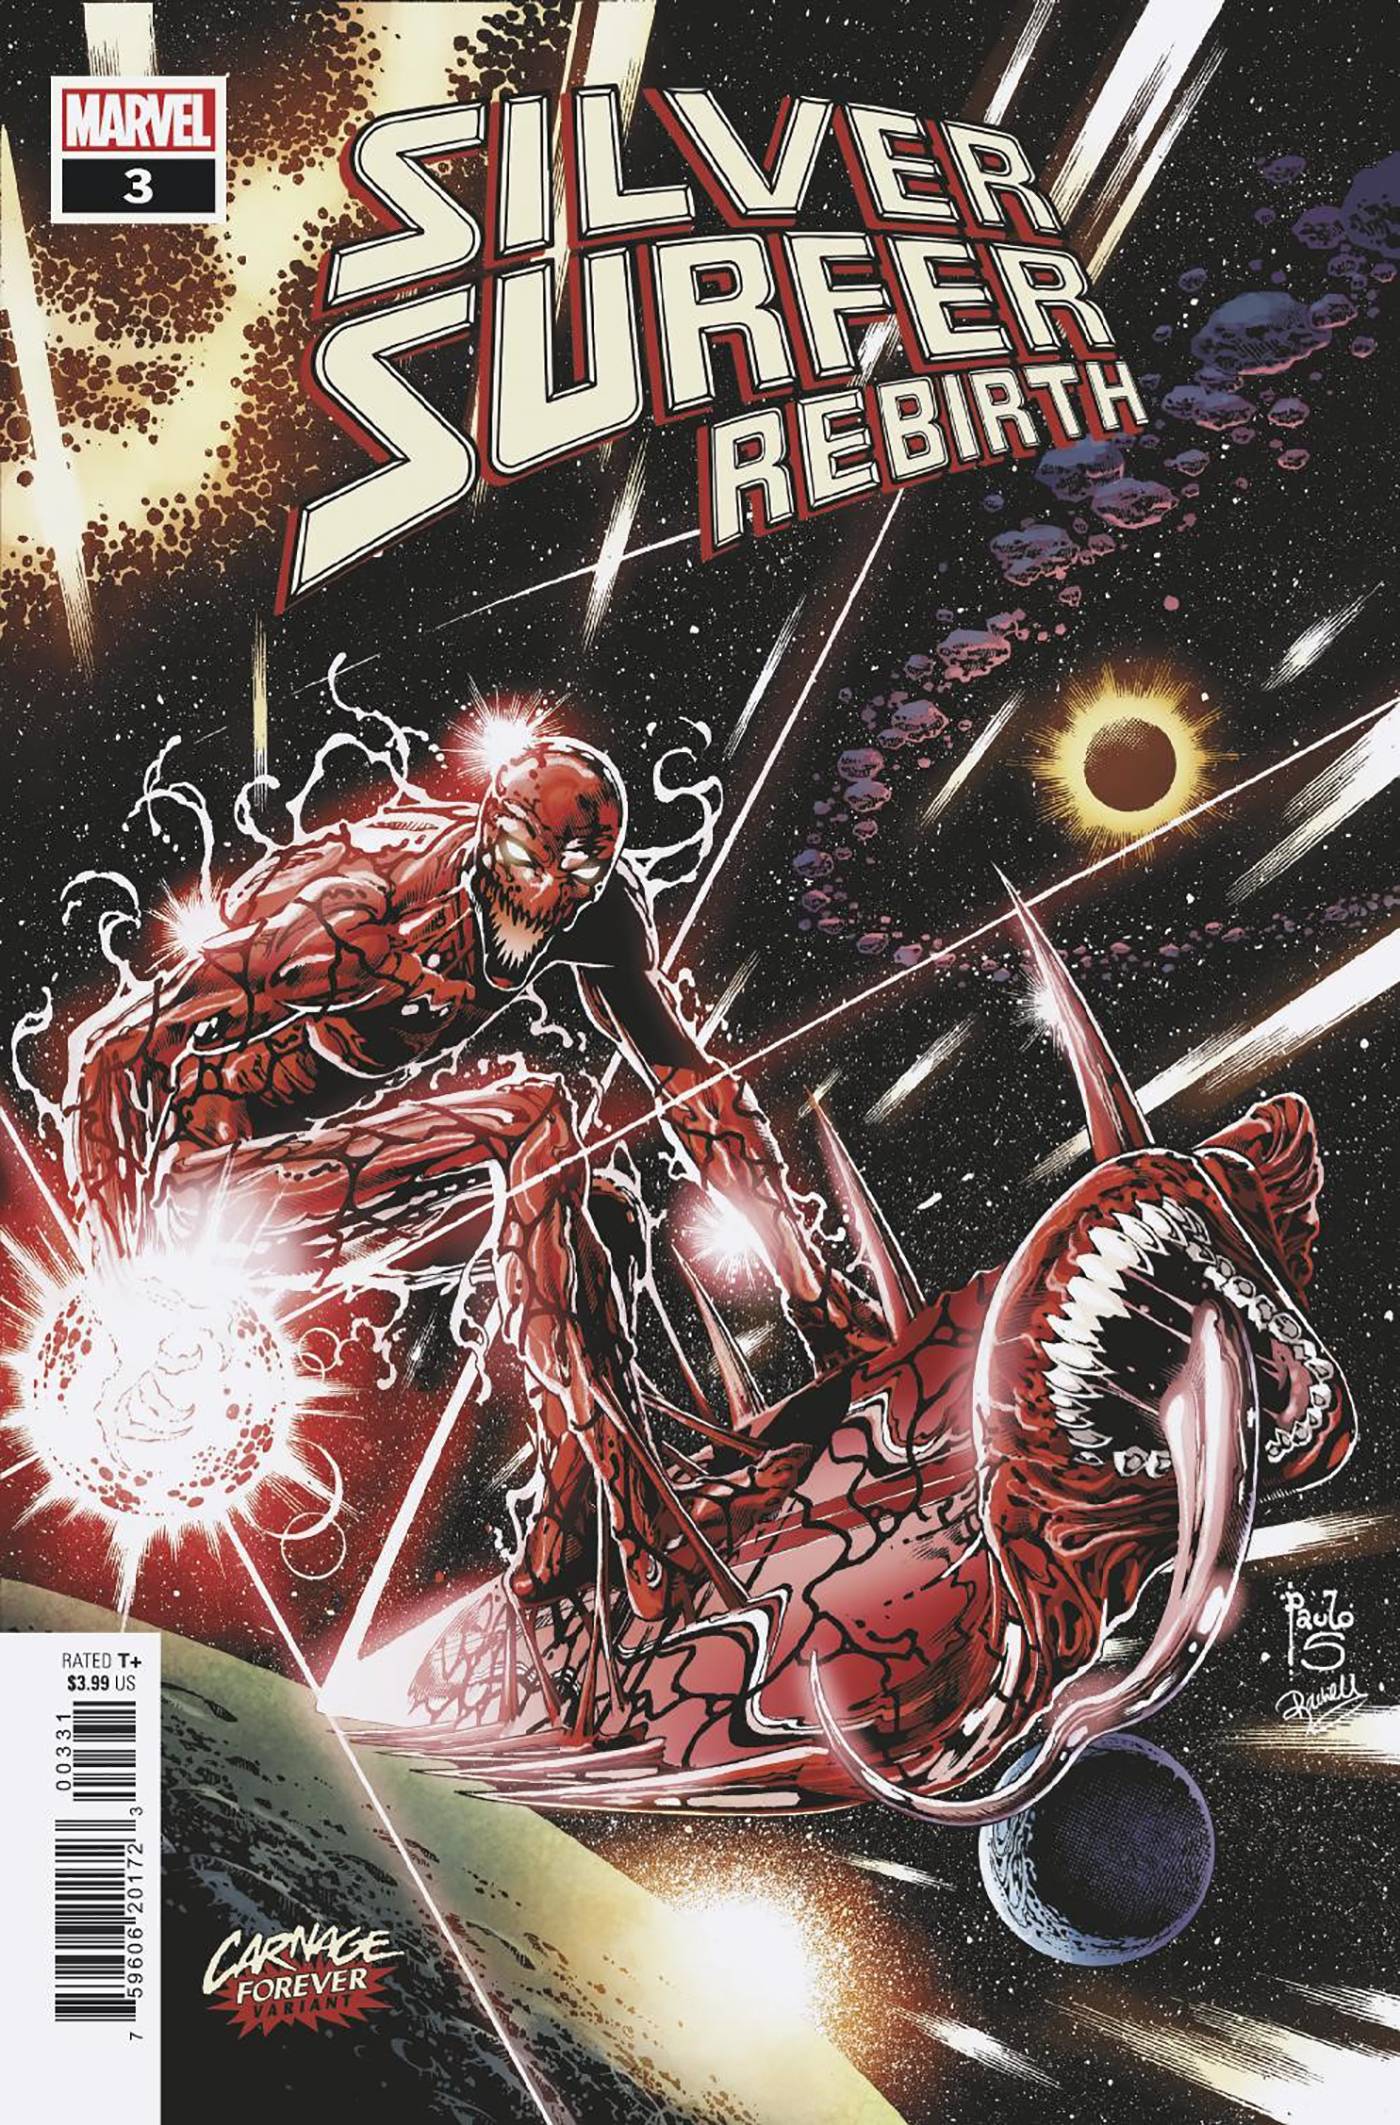 Silver Surfer Rebirth #3 Siquera Carnage Forever Variant (Of 5)